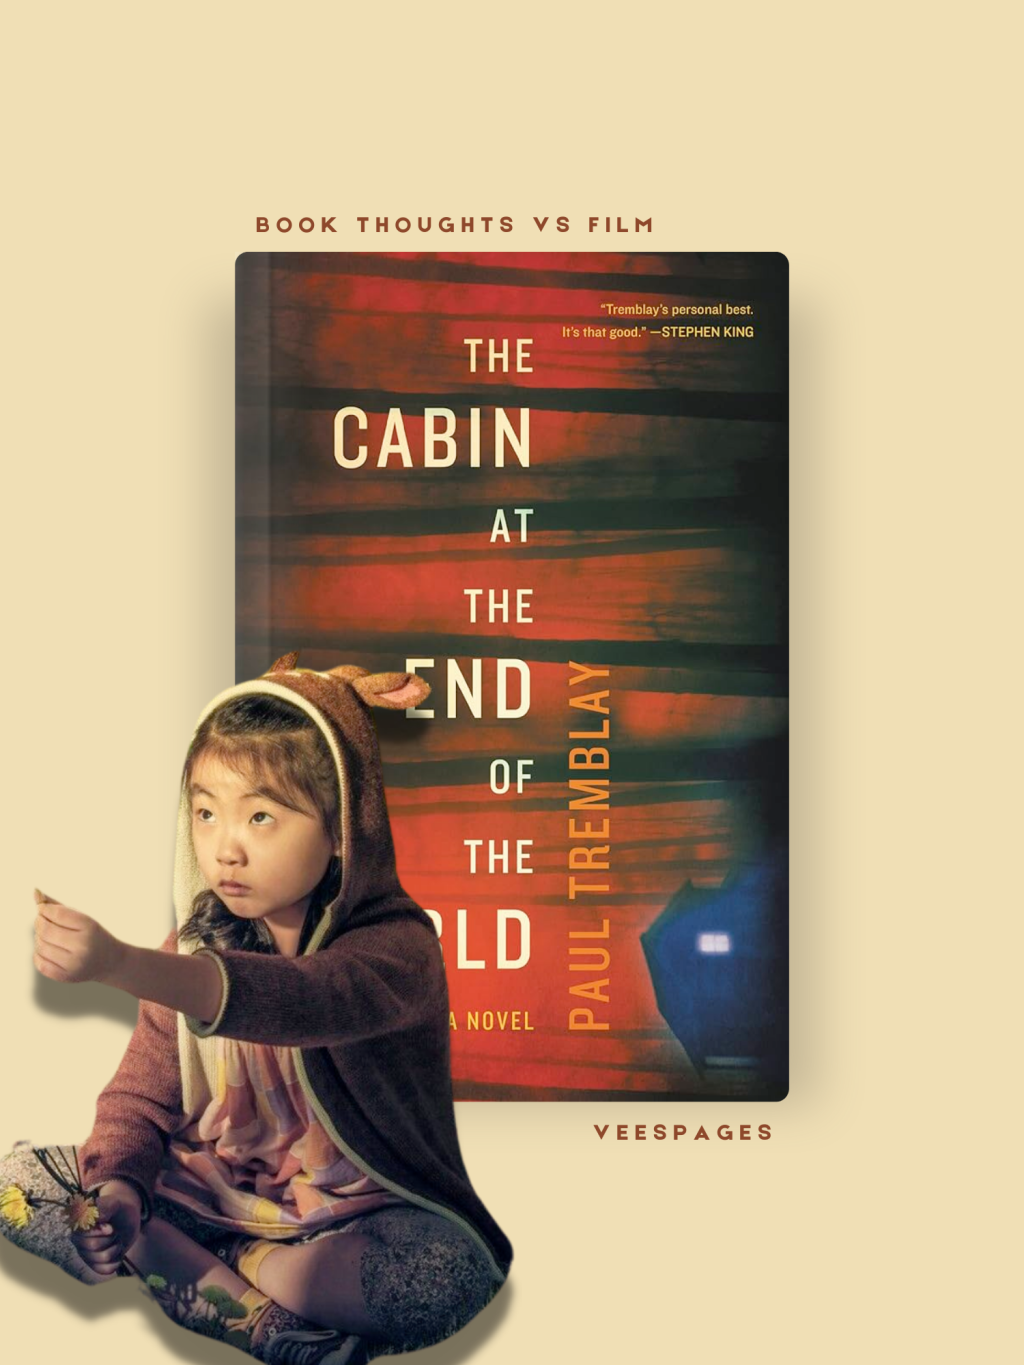 The Cabin at the End of the World by Paul Tremblay ⏤ Horrors of An Impossible Choice